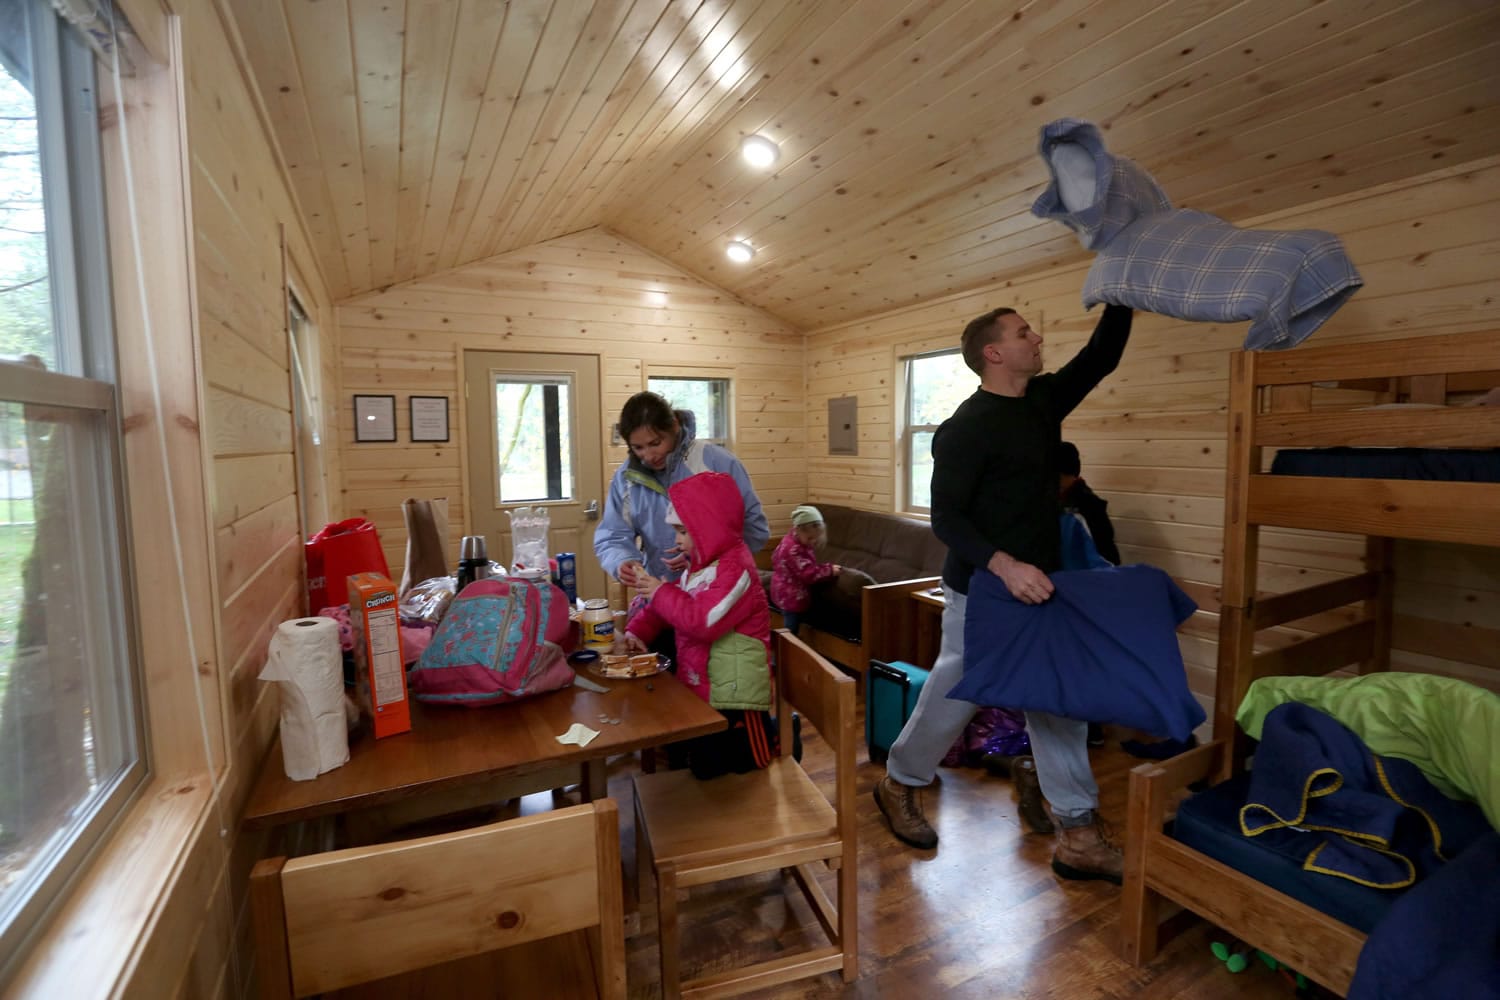 The Thompson family of Tacoma, mom Julianne, dad David and kids Simon, 8; Cecilia, 6; Emilia, 4; and Marilyn, 2, unpack in their cabin at Dash Point State Park in Federal Way in November. &quot;We just wanted to find a place close by and get away from the daily grind,&quot; Julianne Thompson said. (Ellen M.